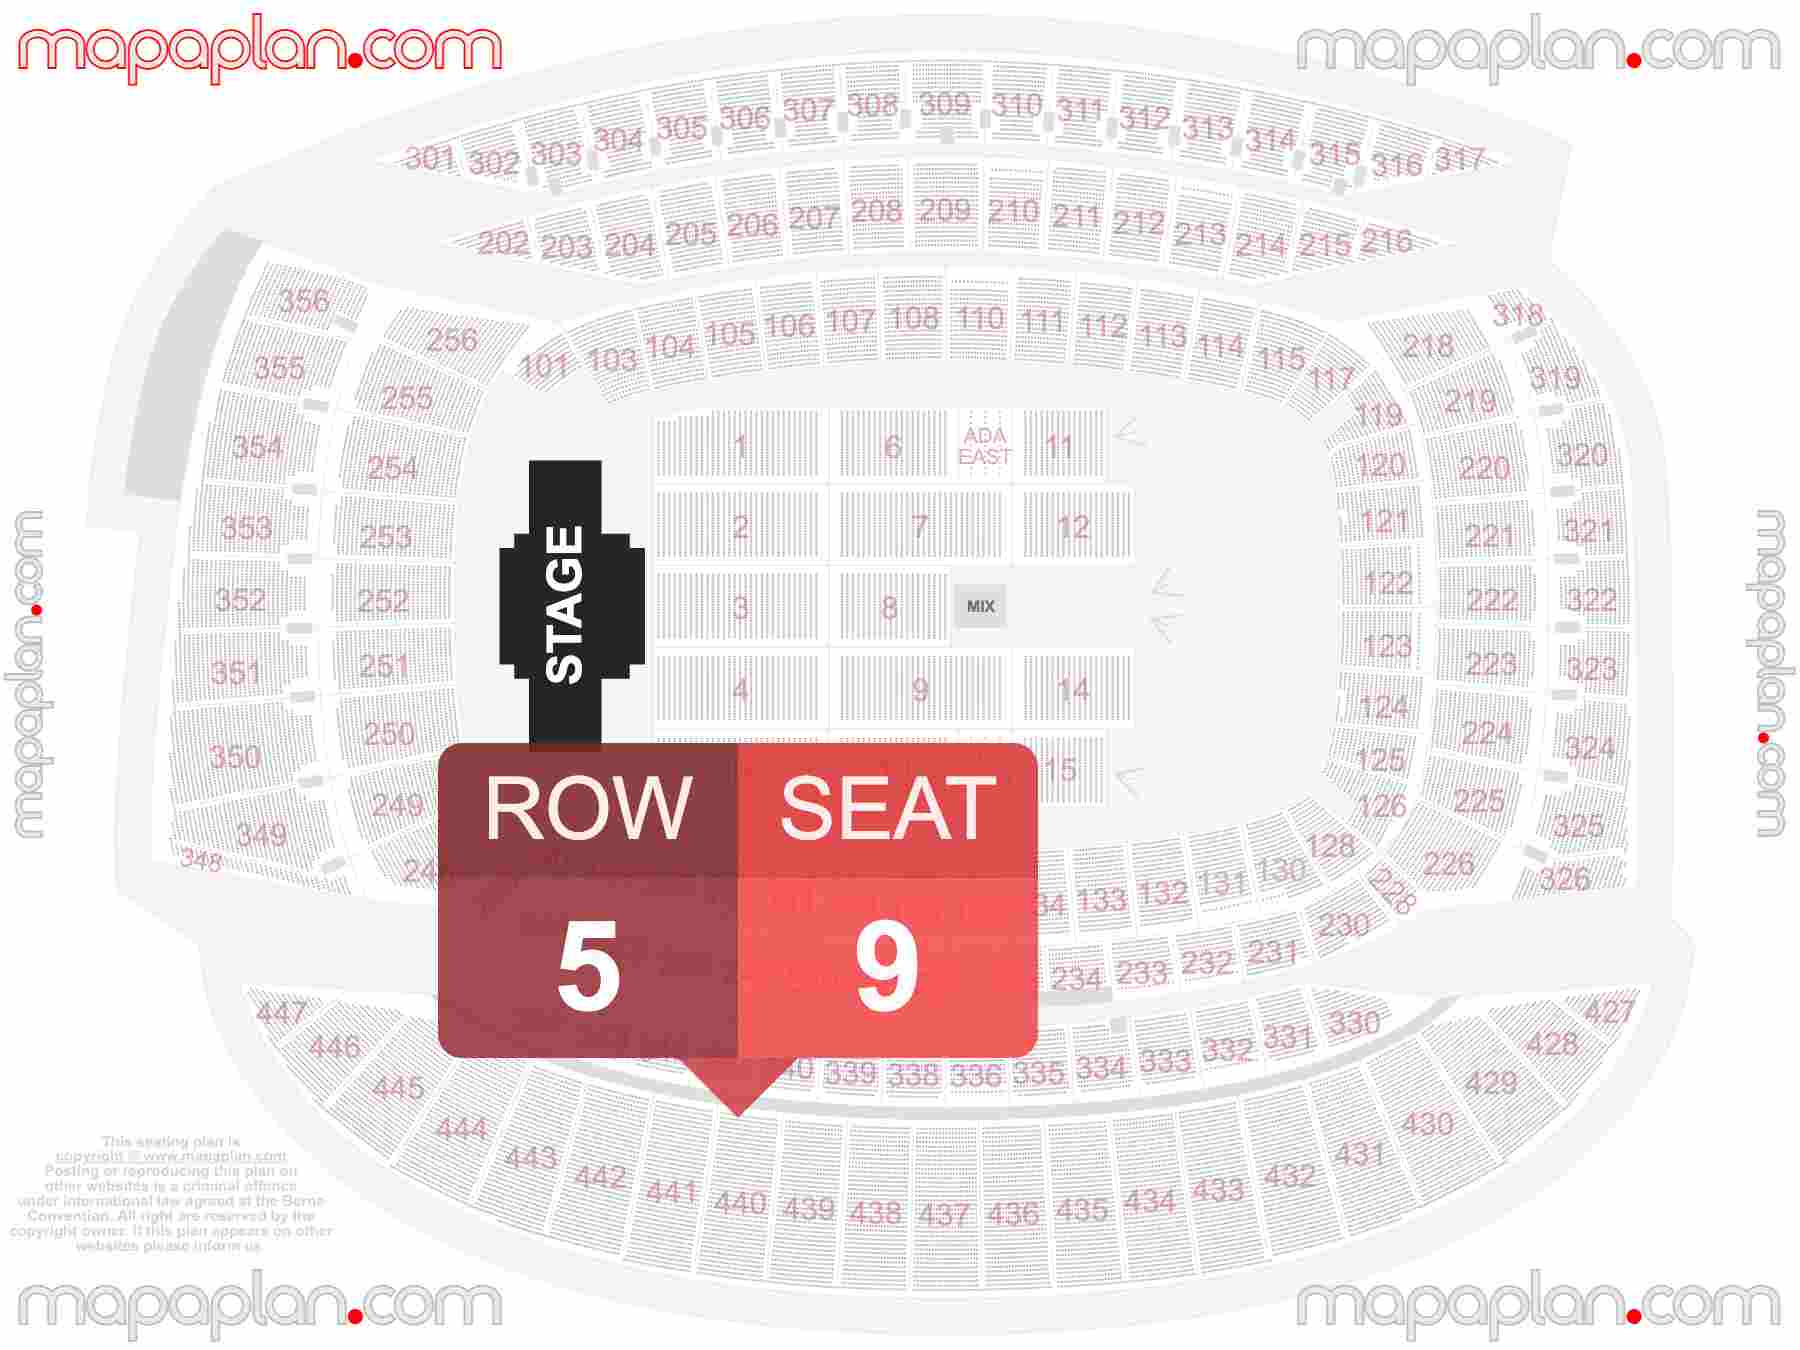 Chicago Soldier Field seating chart Concert fully seated floor map seating plan - Interactive map to find best seat and row numbers